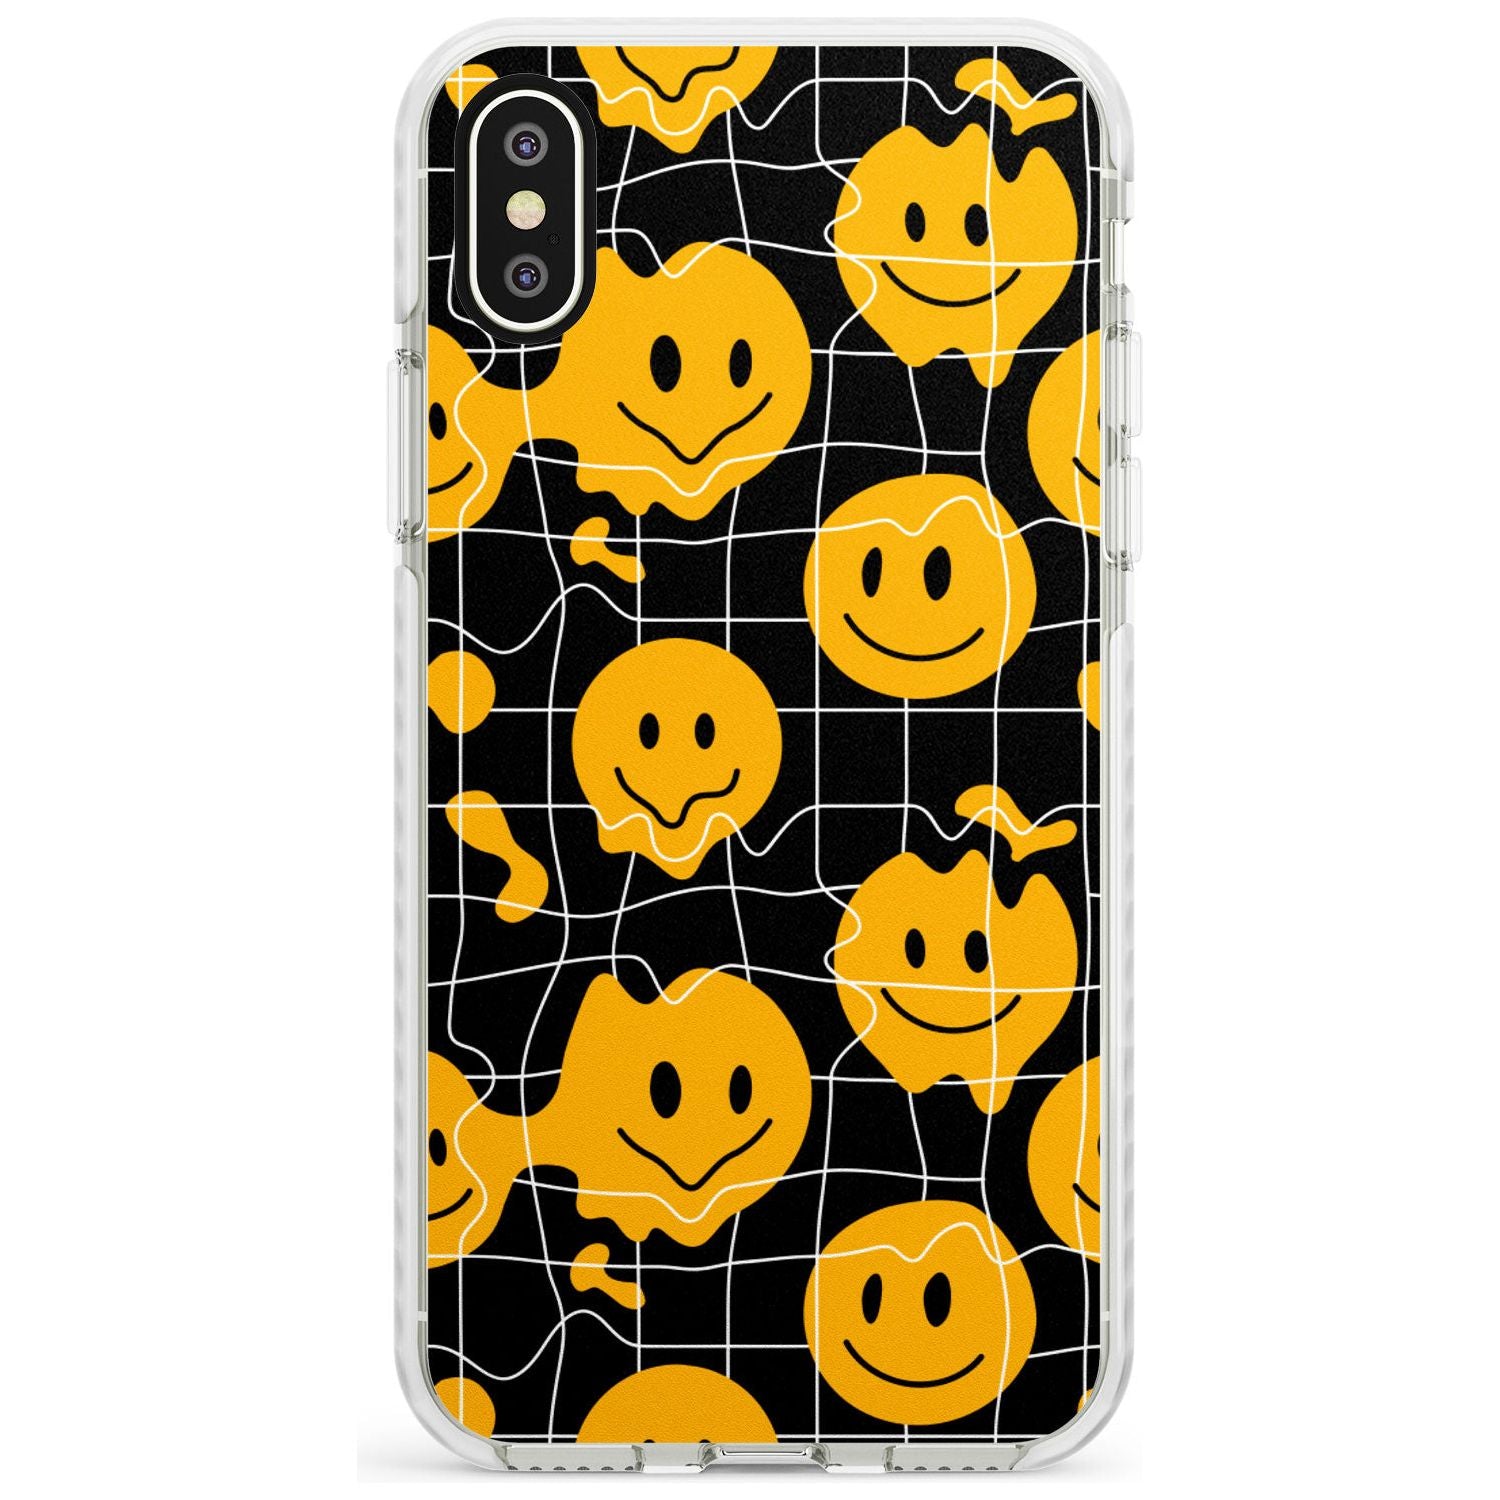 Acid Face Grid Pattern Impact Phone Case for iPhone X XS Max XR